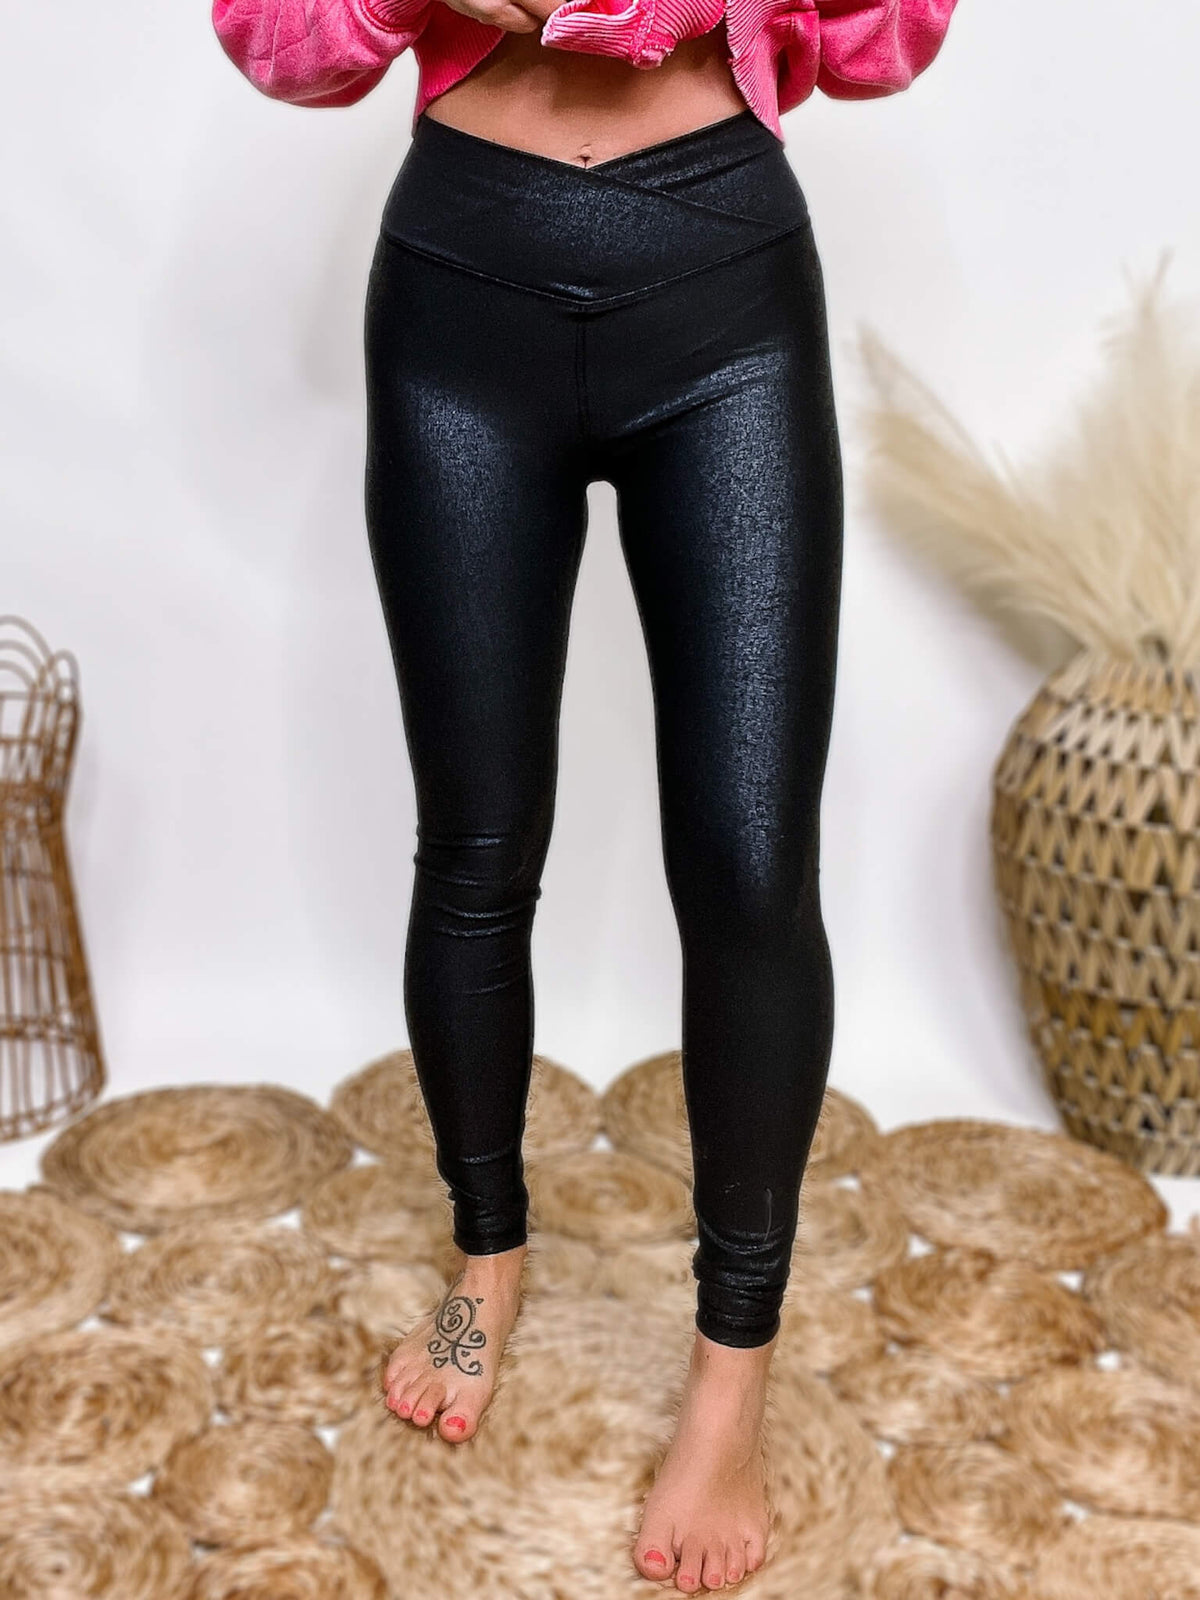 Mono B Black Leather Look Foil Print Pebbled Print V Waist Crossover Leggings Fitted, Stretchy and Smoothing 88% Polyester, 12% Spandex True to Size